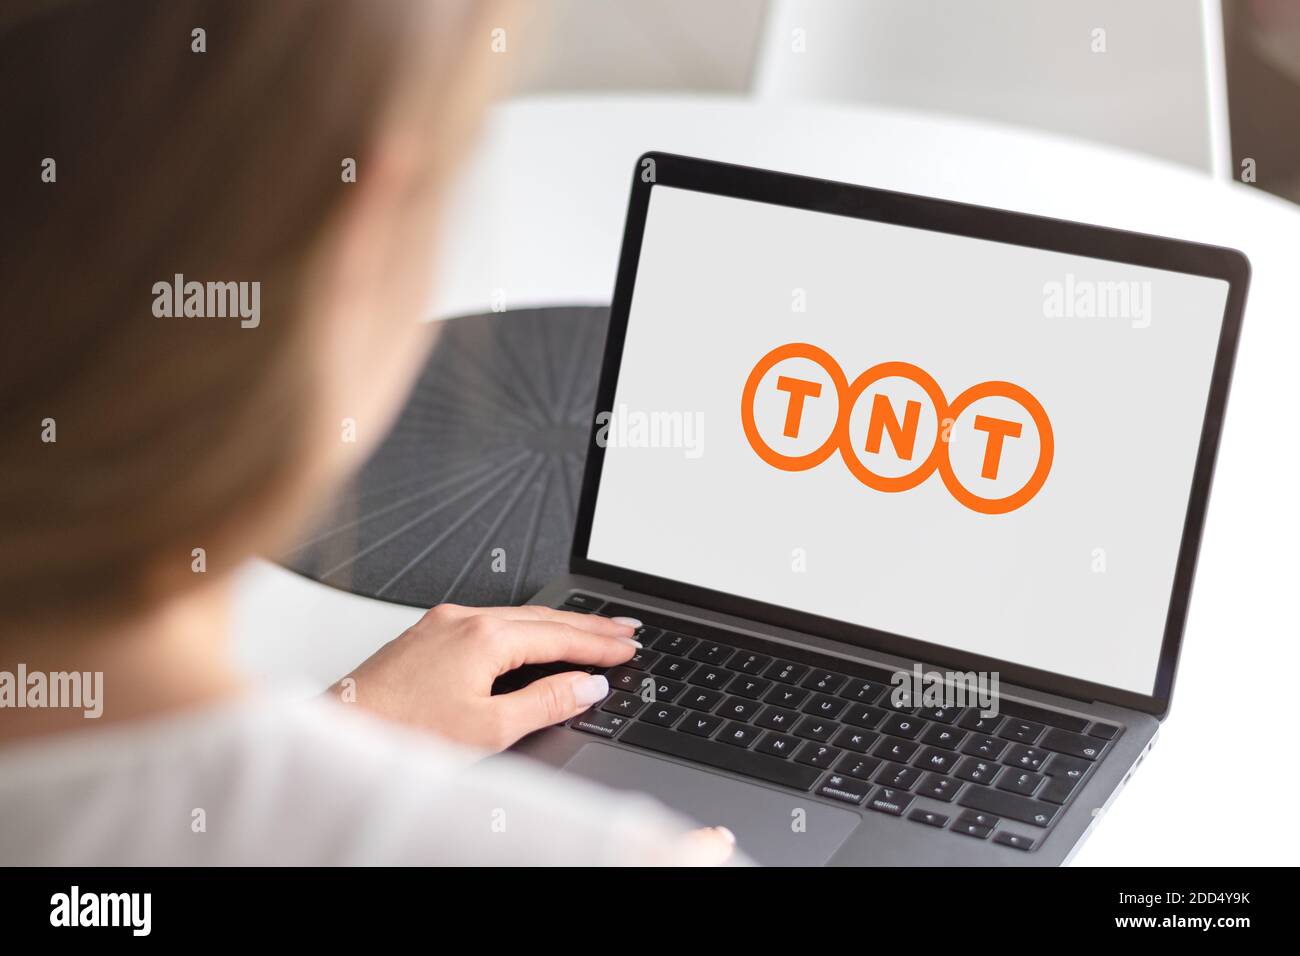 Guilherand-Granges, France - November 24, 2020. Notebook with TNT logo. Dutch international courier delivery services company. Stock Photo